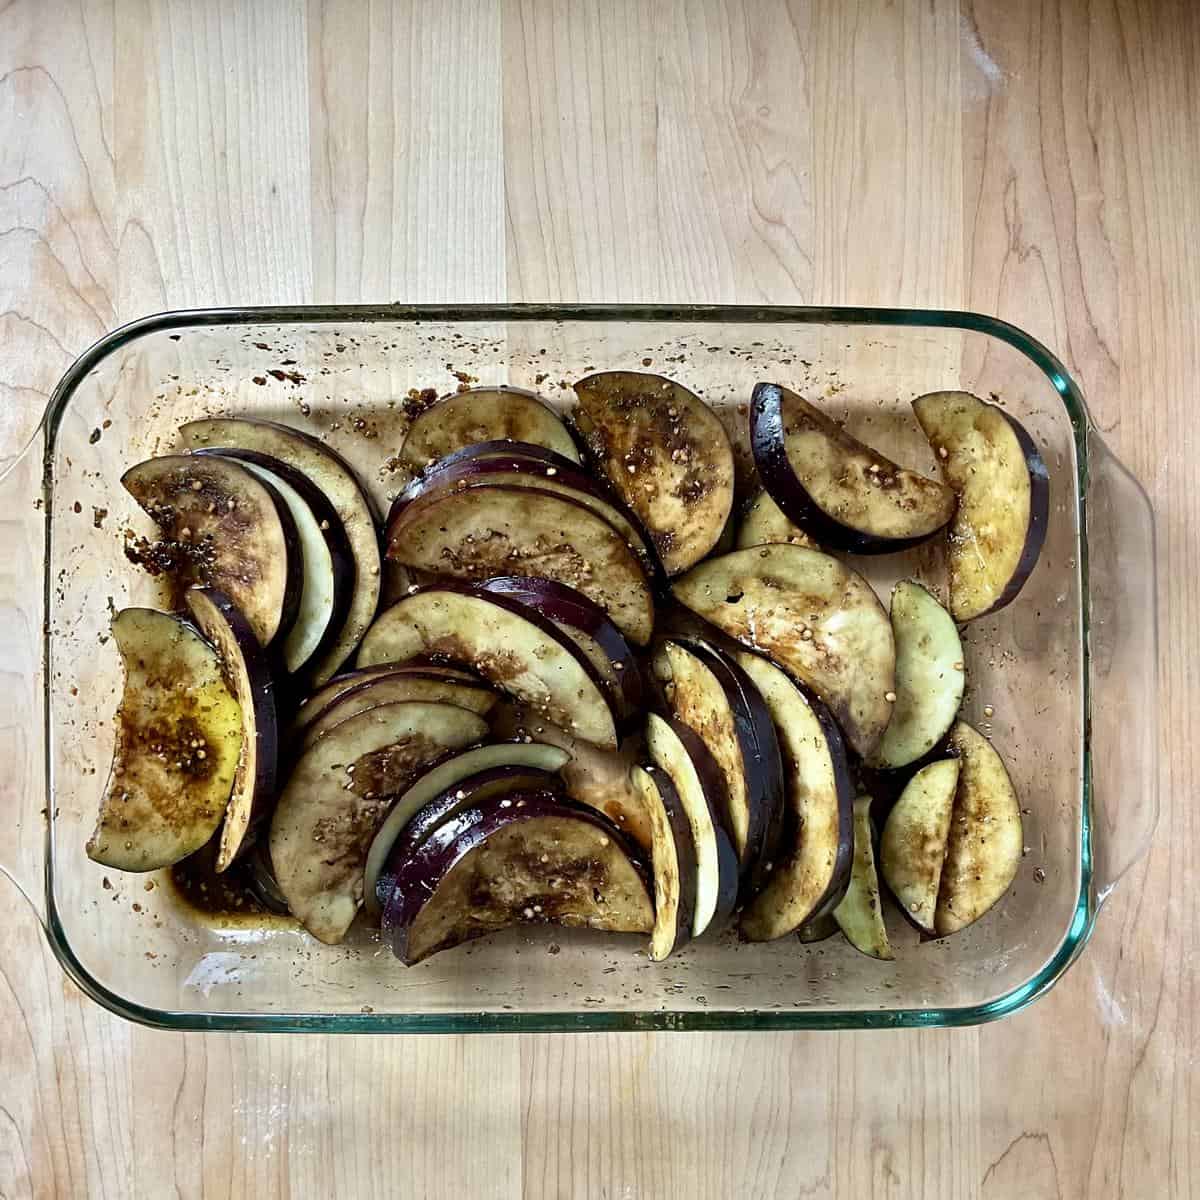 Marinating sliced eggplant in a shallow dish.